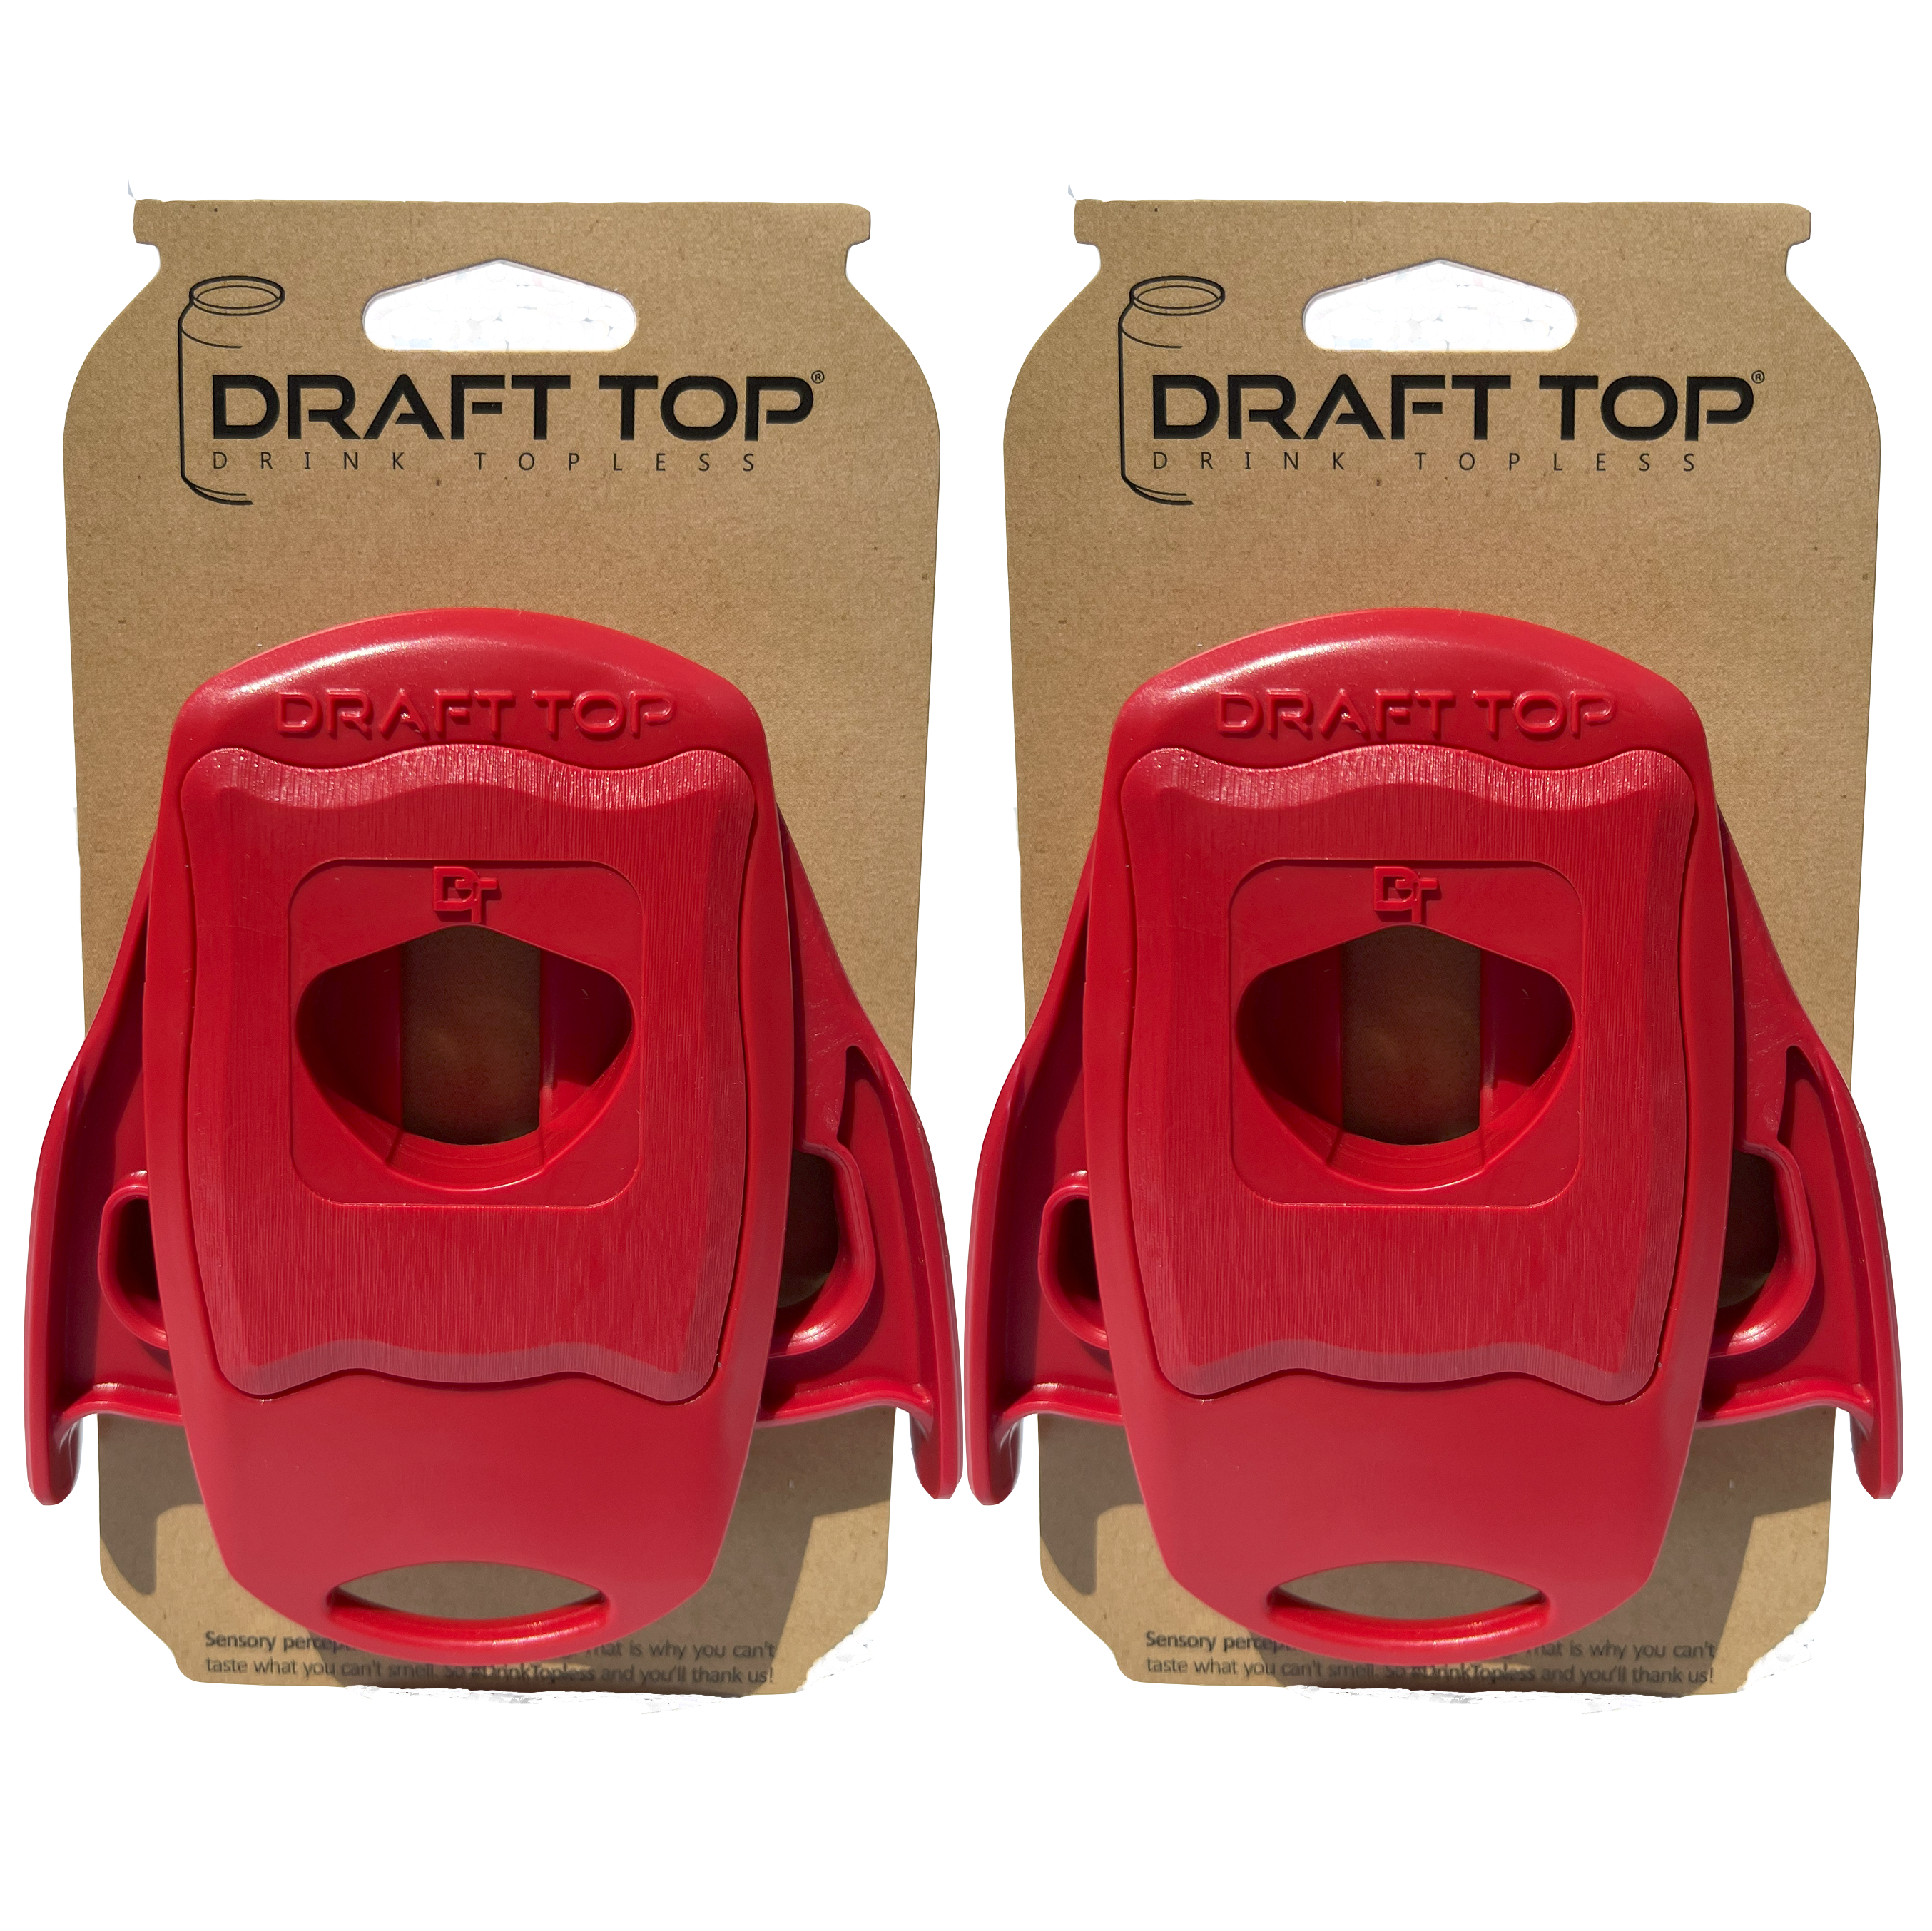 Draft Top LIFT Can Opener